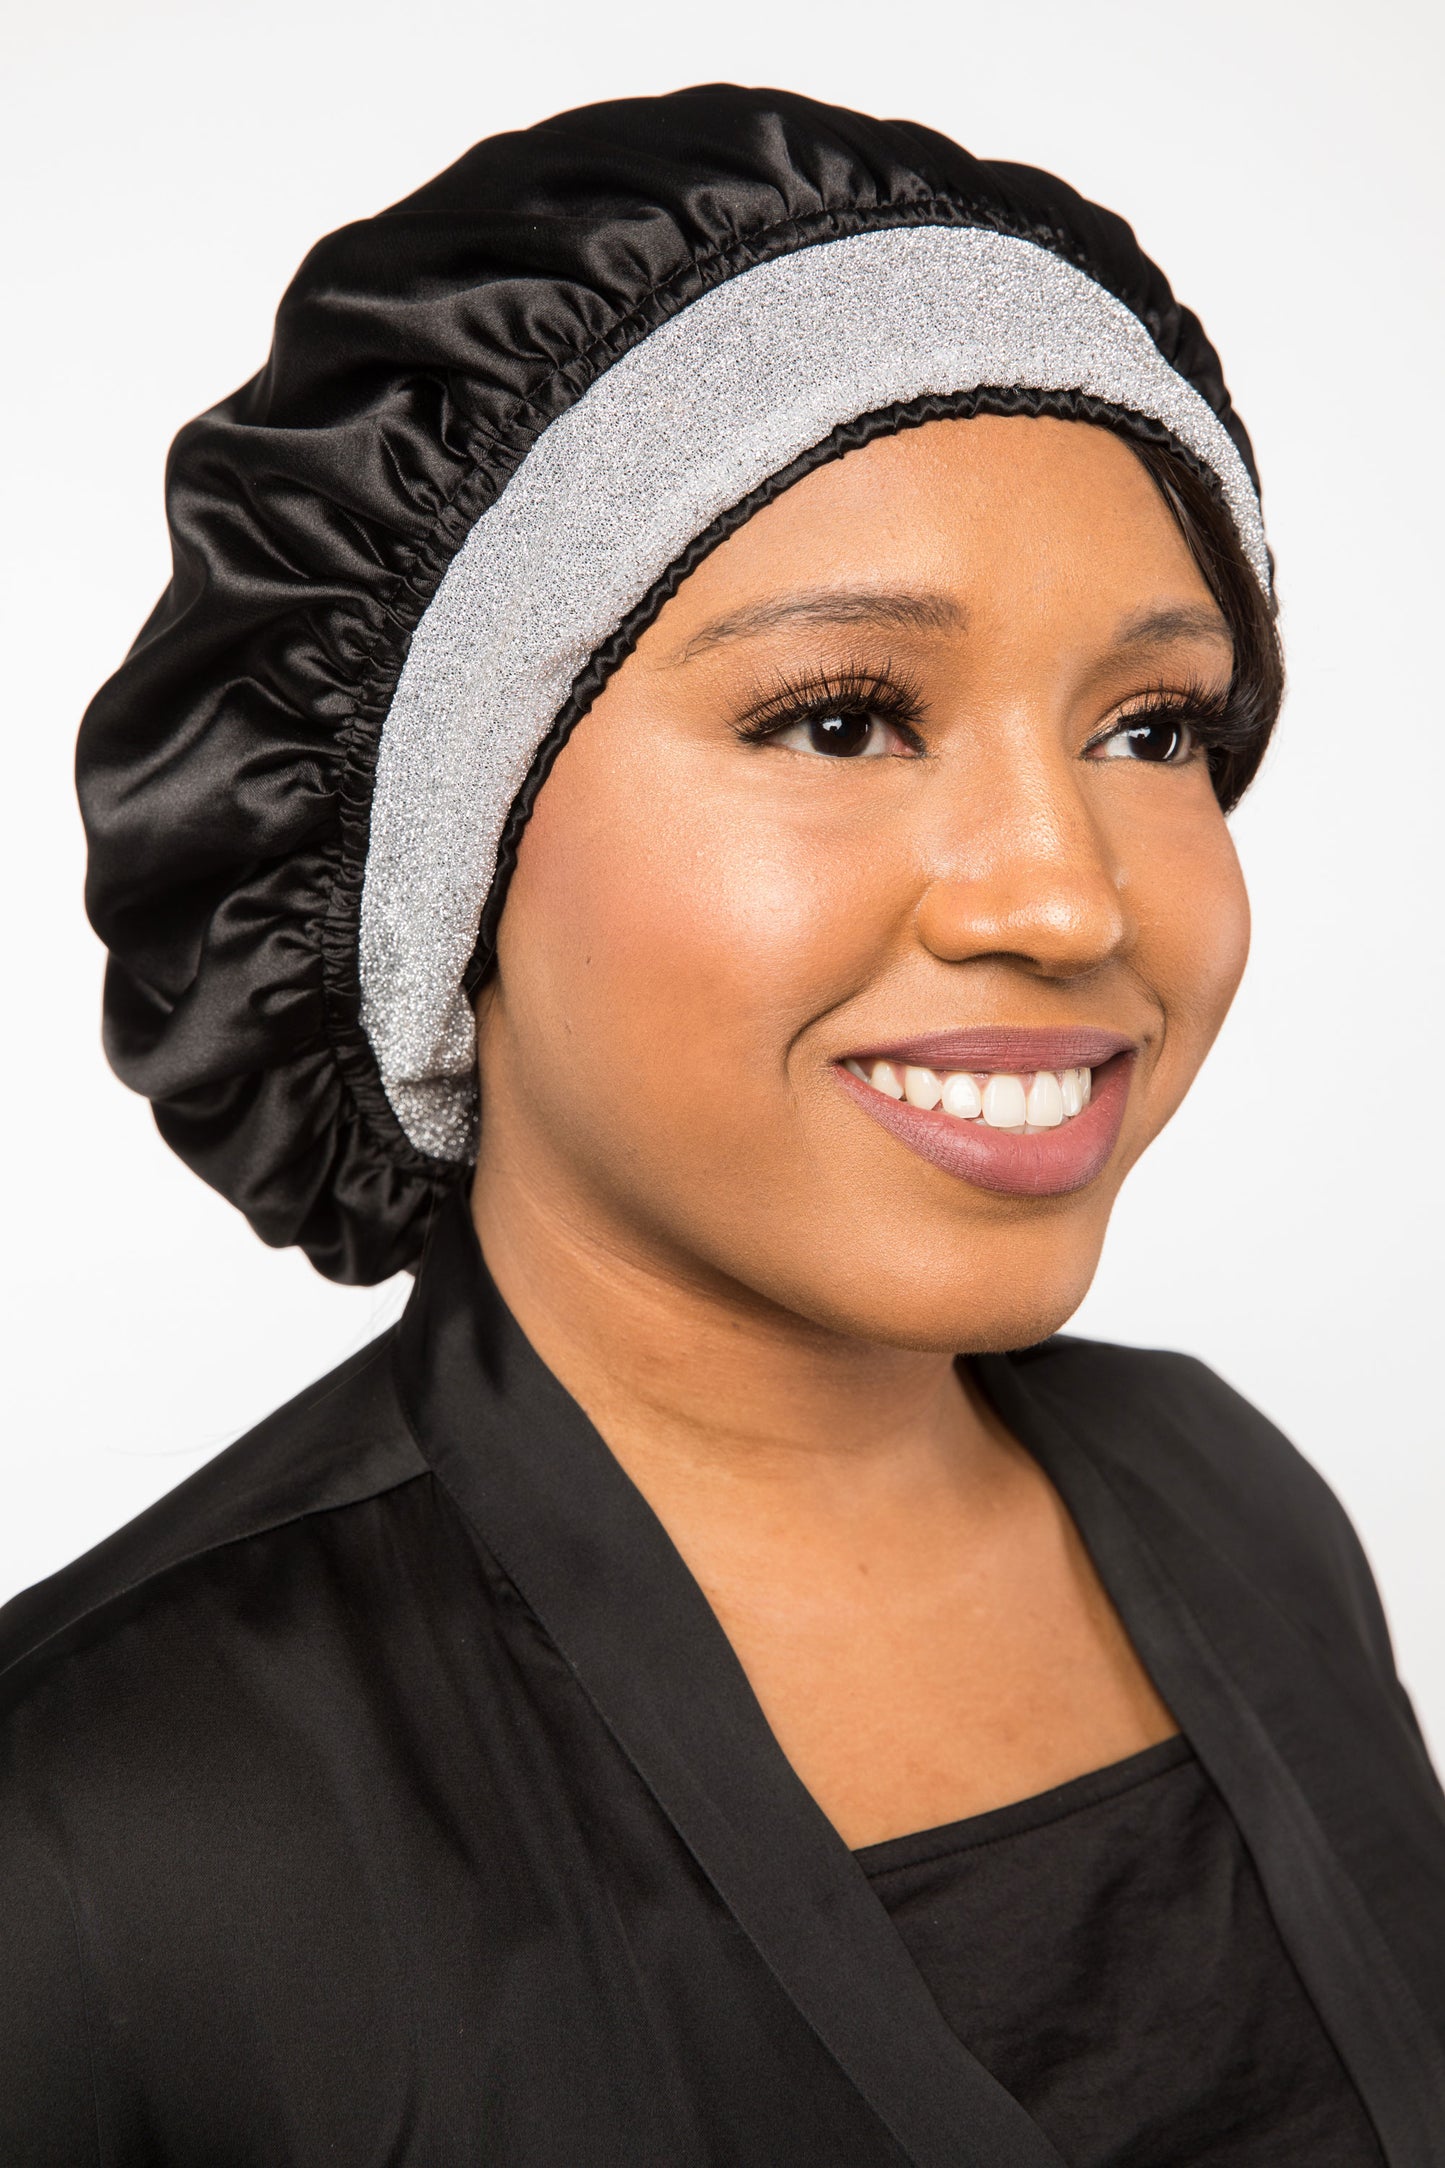 Black Satin-Lined Bonnet with Silver Metallic Band | Channelle